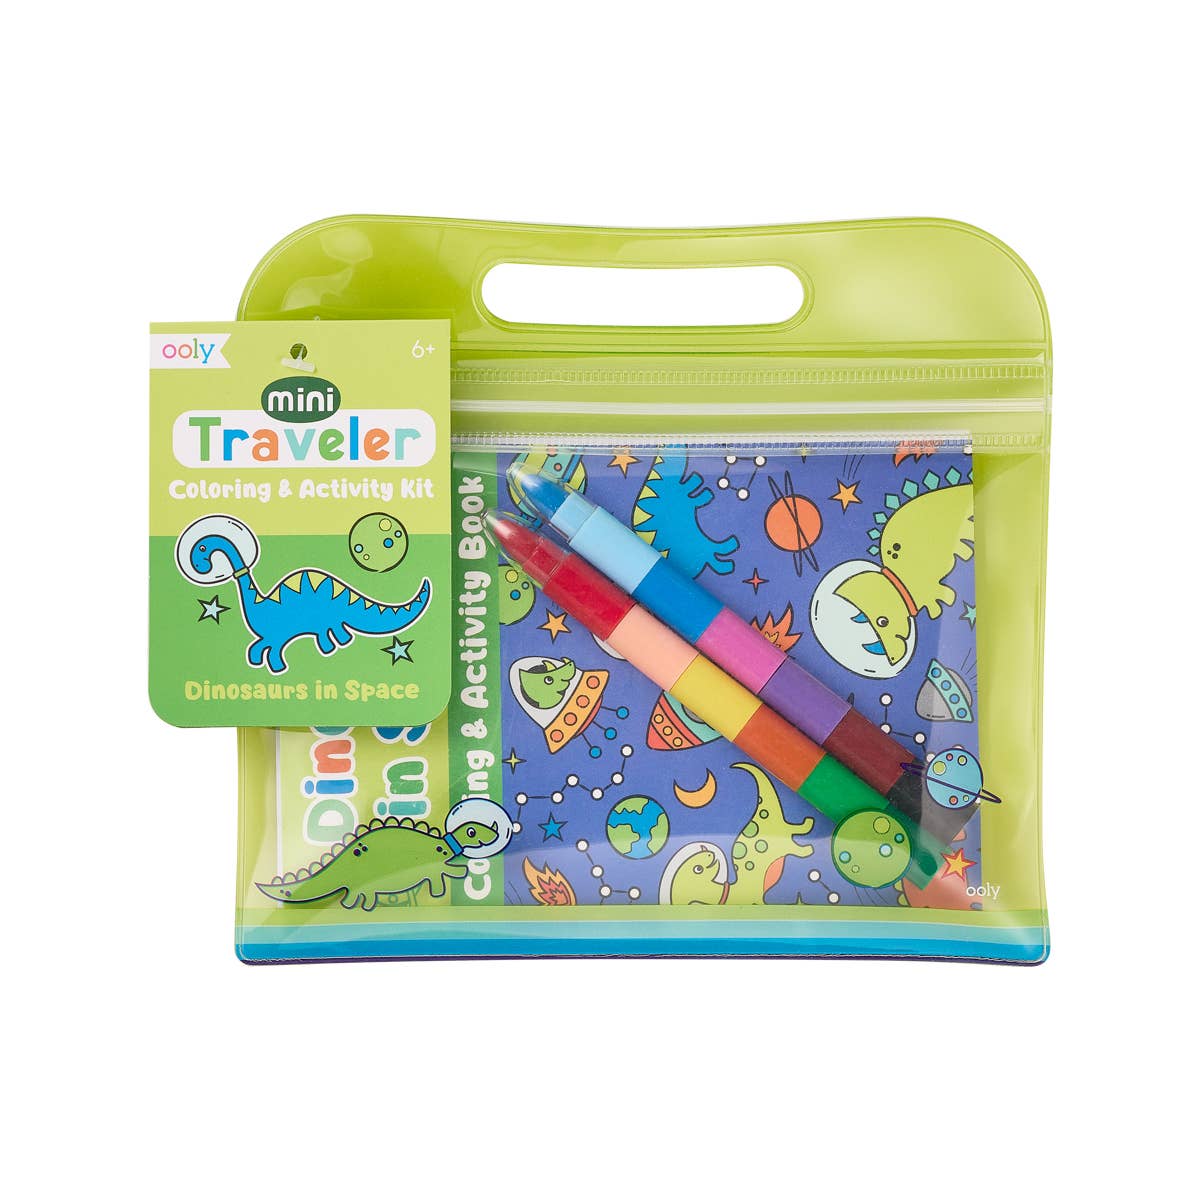 OOLY - Mini Traveler Coloring + Activity Kit - Dinosaurs in Space